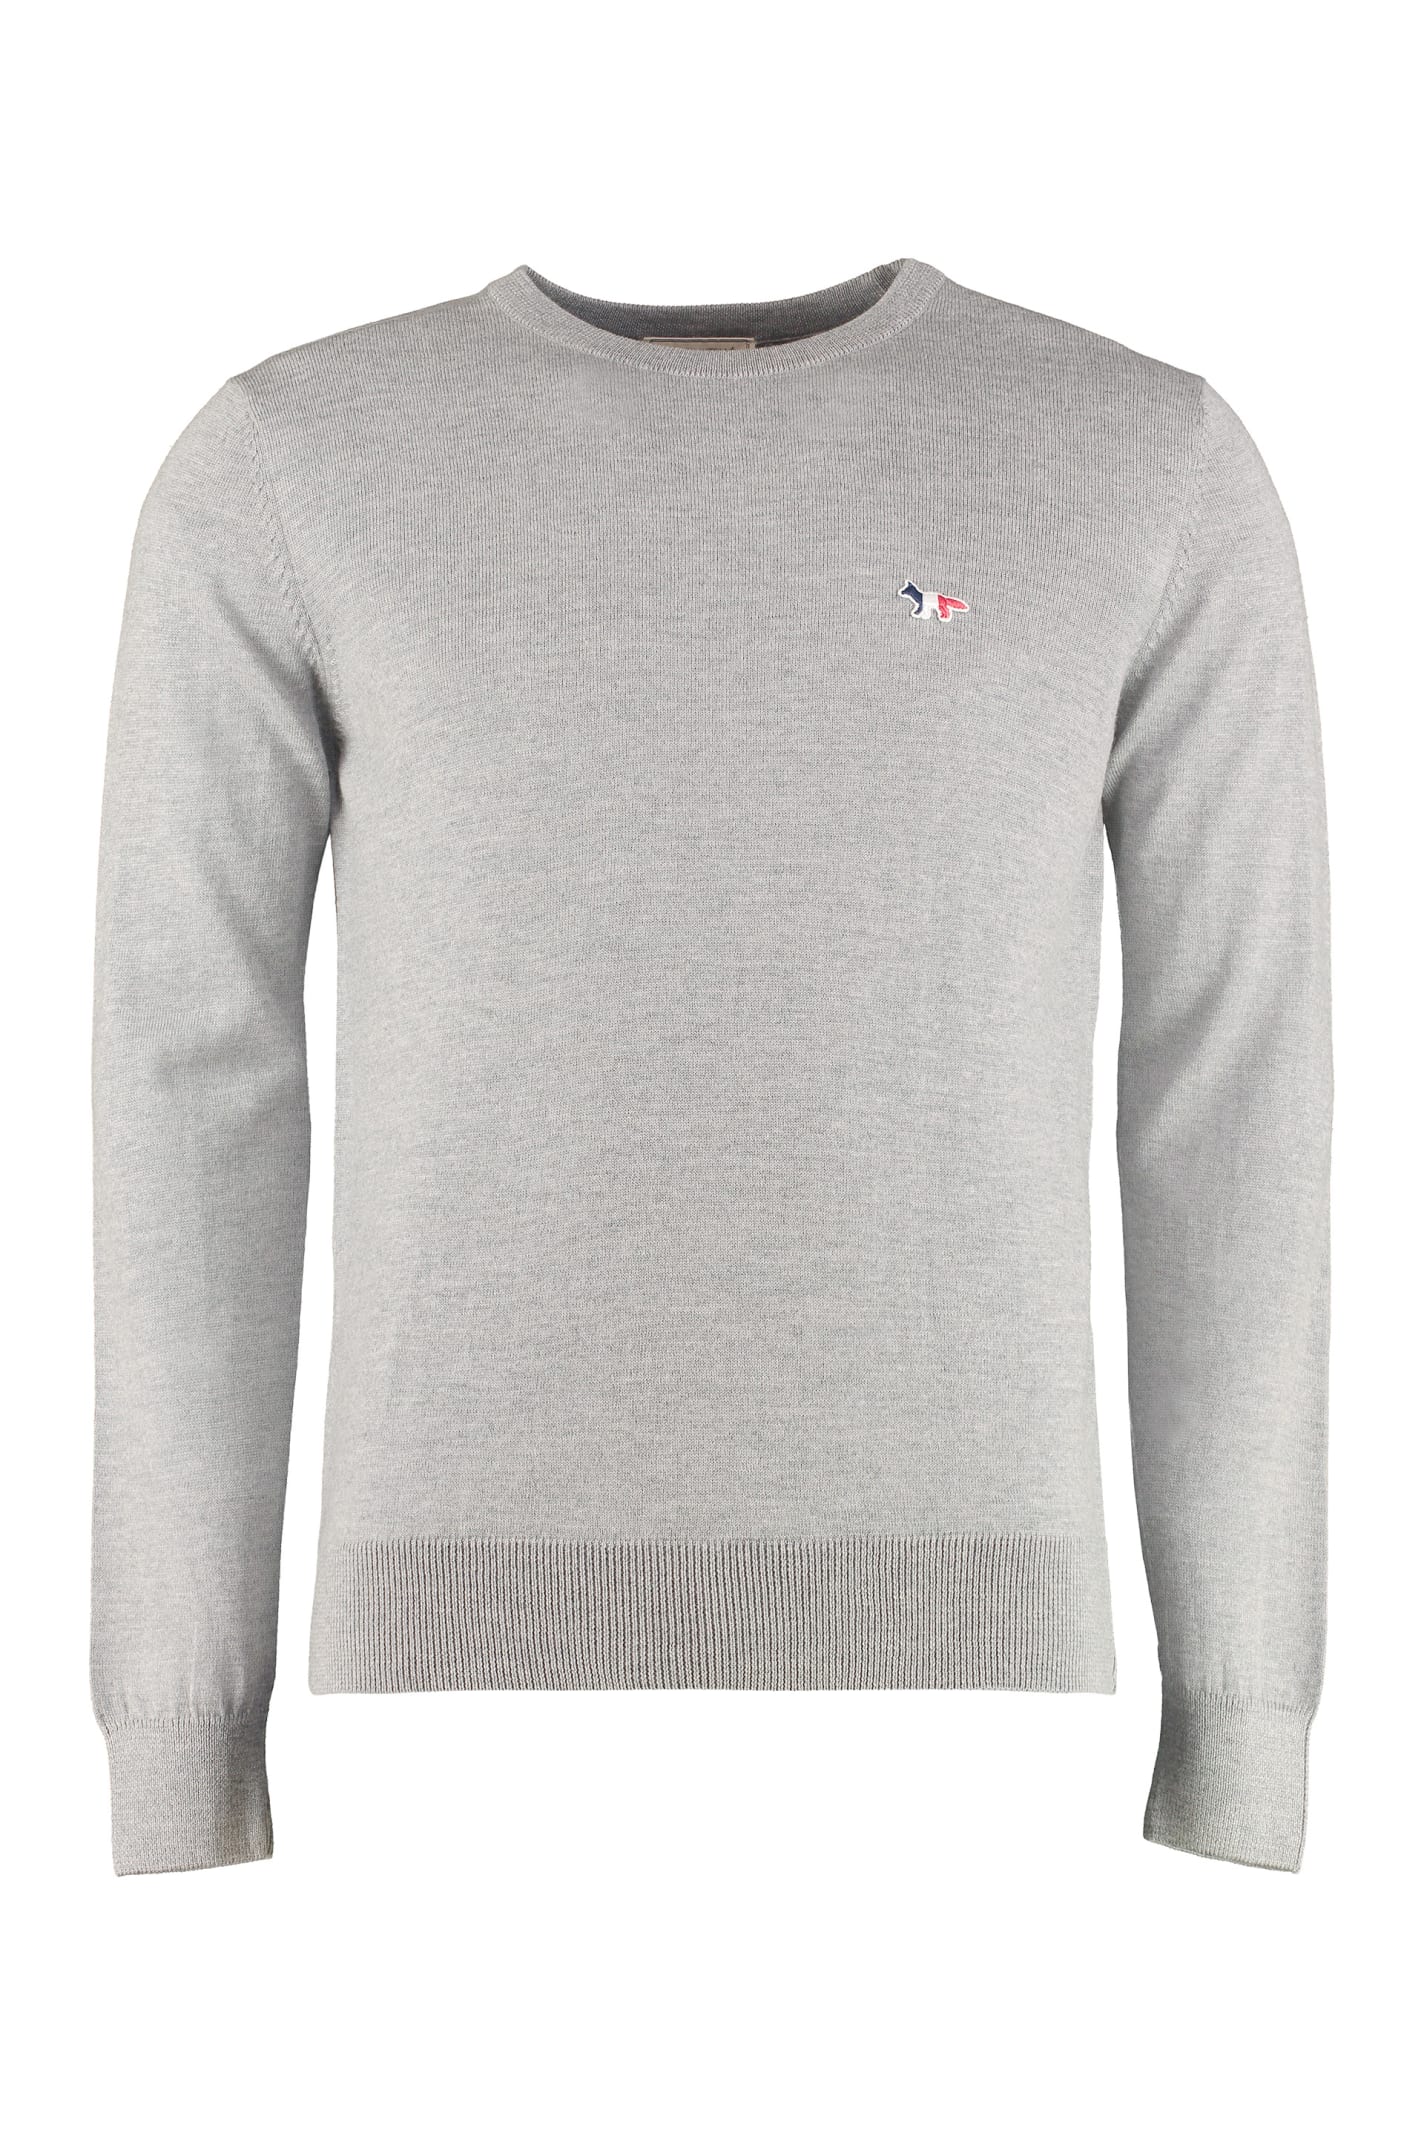 Maison Kitsuné Wool Crew-neck Pullover In Grey